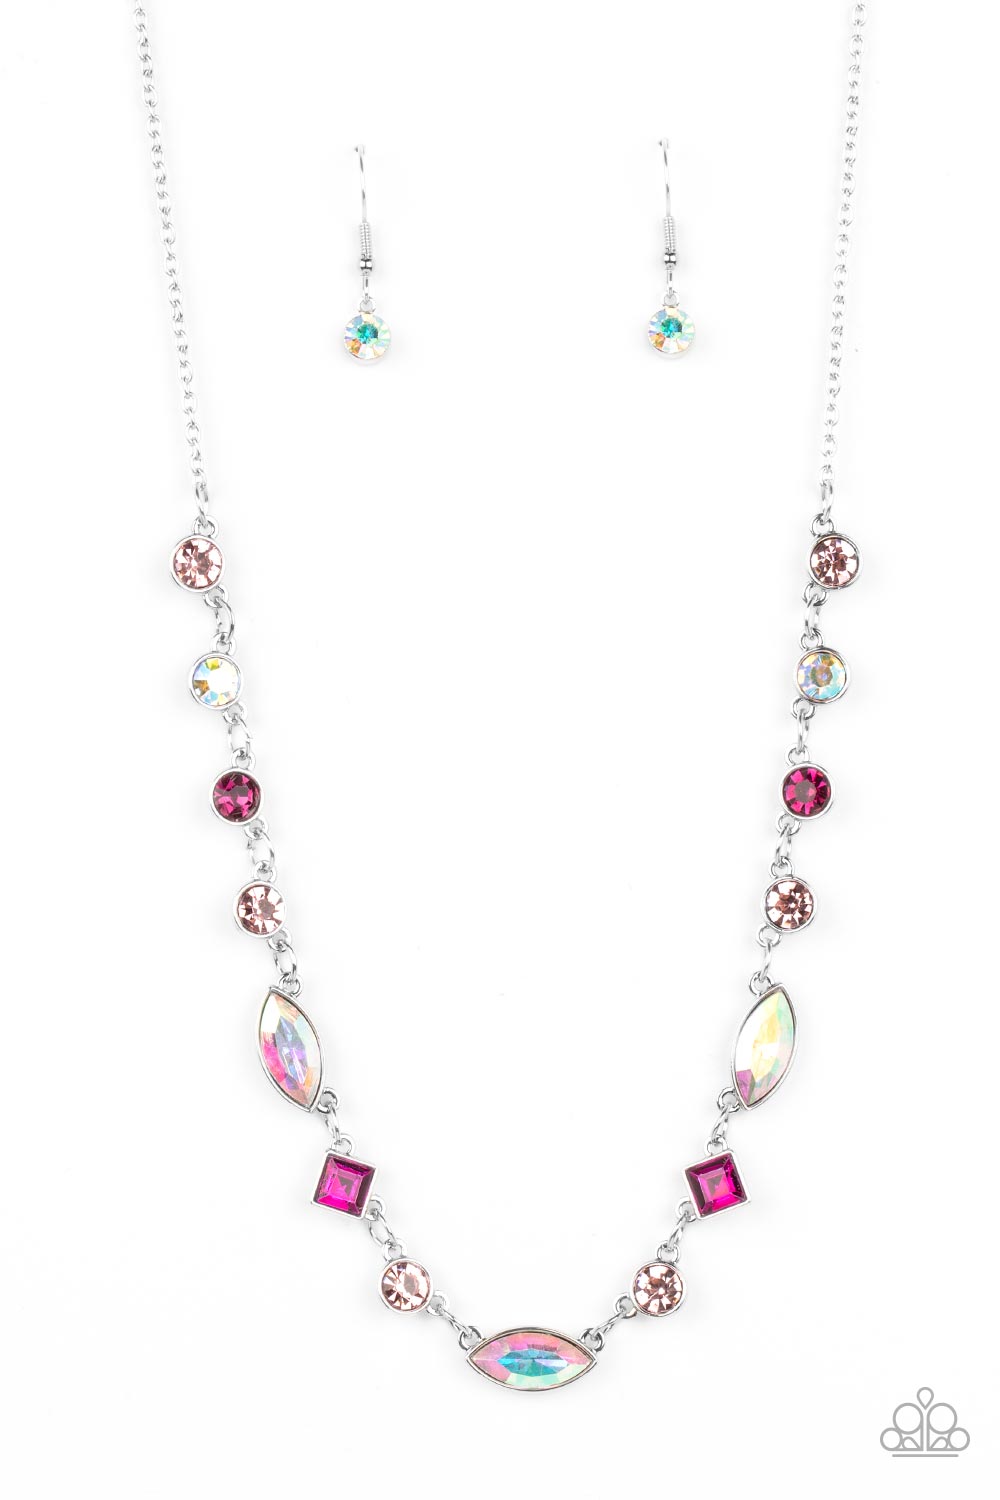 Irresistible HEIR-idescence Pink Necklace - Paparazzi Accessories  Varying in geometric shapes and shades of pink, glittery rose and fuchsia gems are sprinkled between iridescent rhinestone accents for a dreamy refined, and irresistible finish. Features an adjustable clasp closure. Due to its prismatic palette, color may vary.  Sold as one individual necklace. Includes one pair of matching earrings.